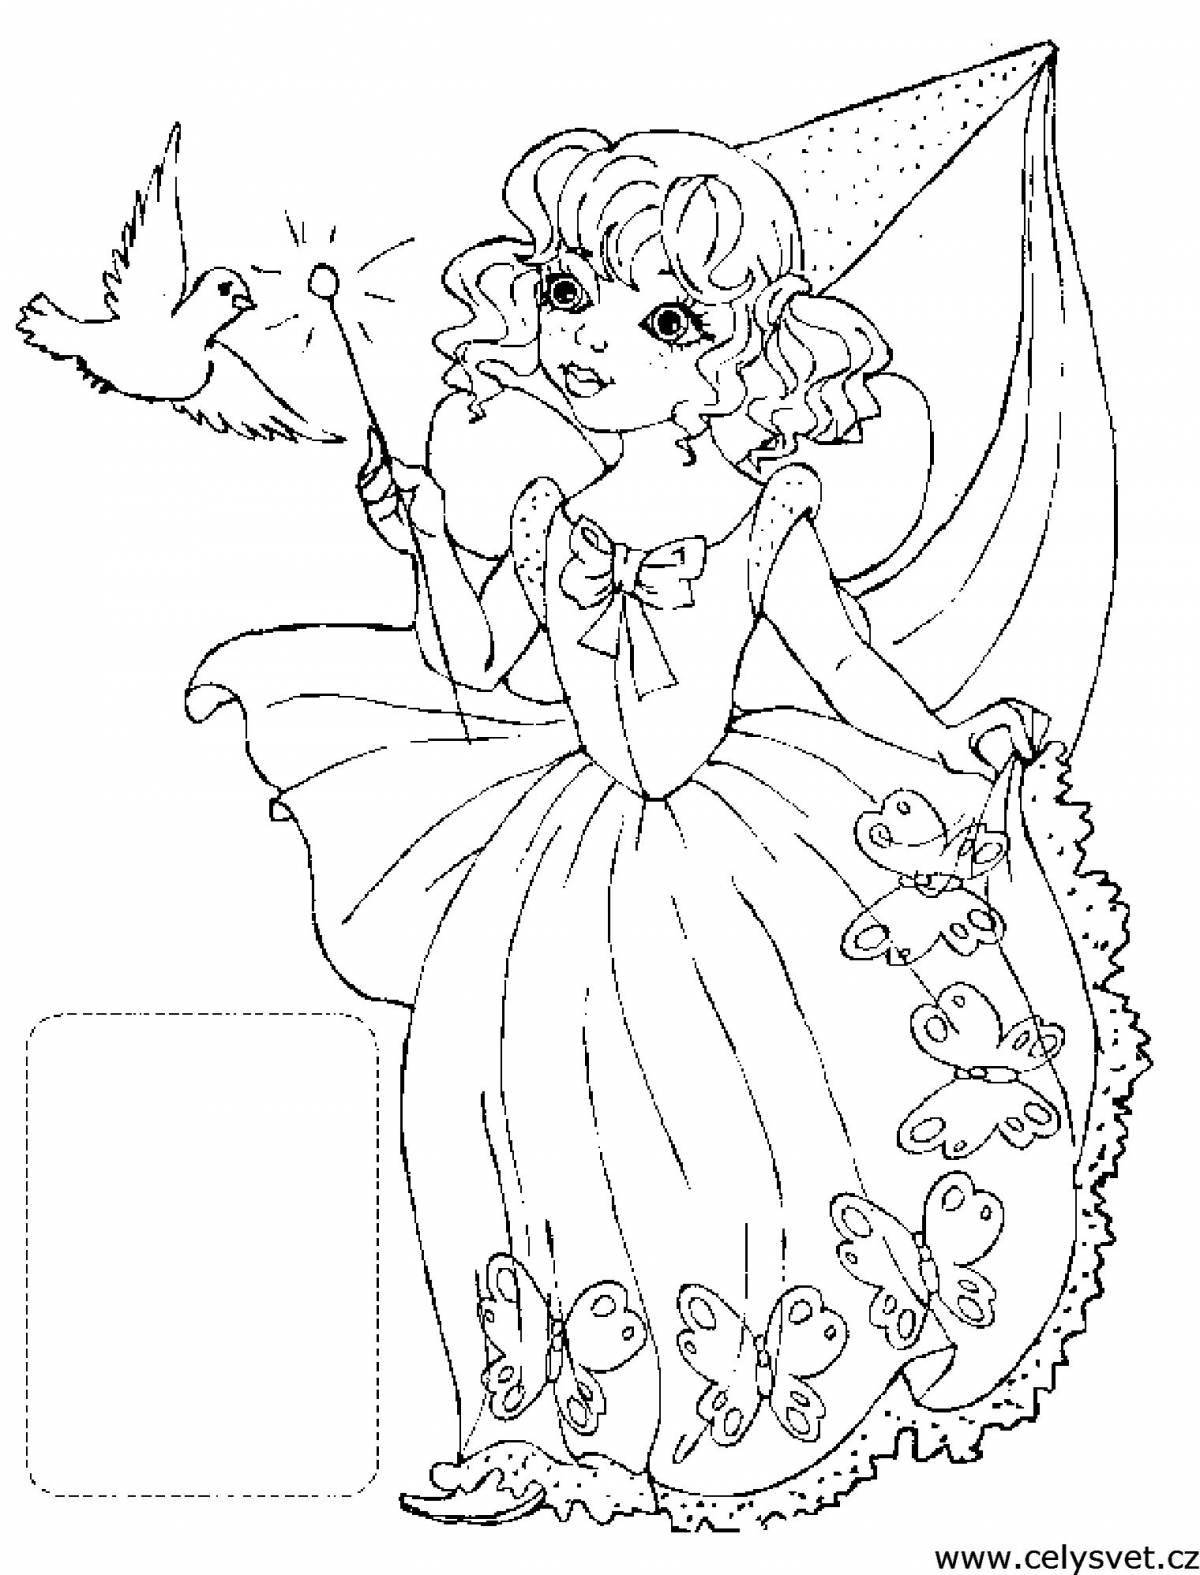 Adorable magical coloring book for kids